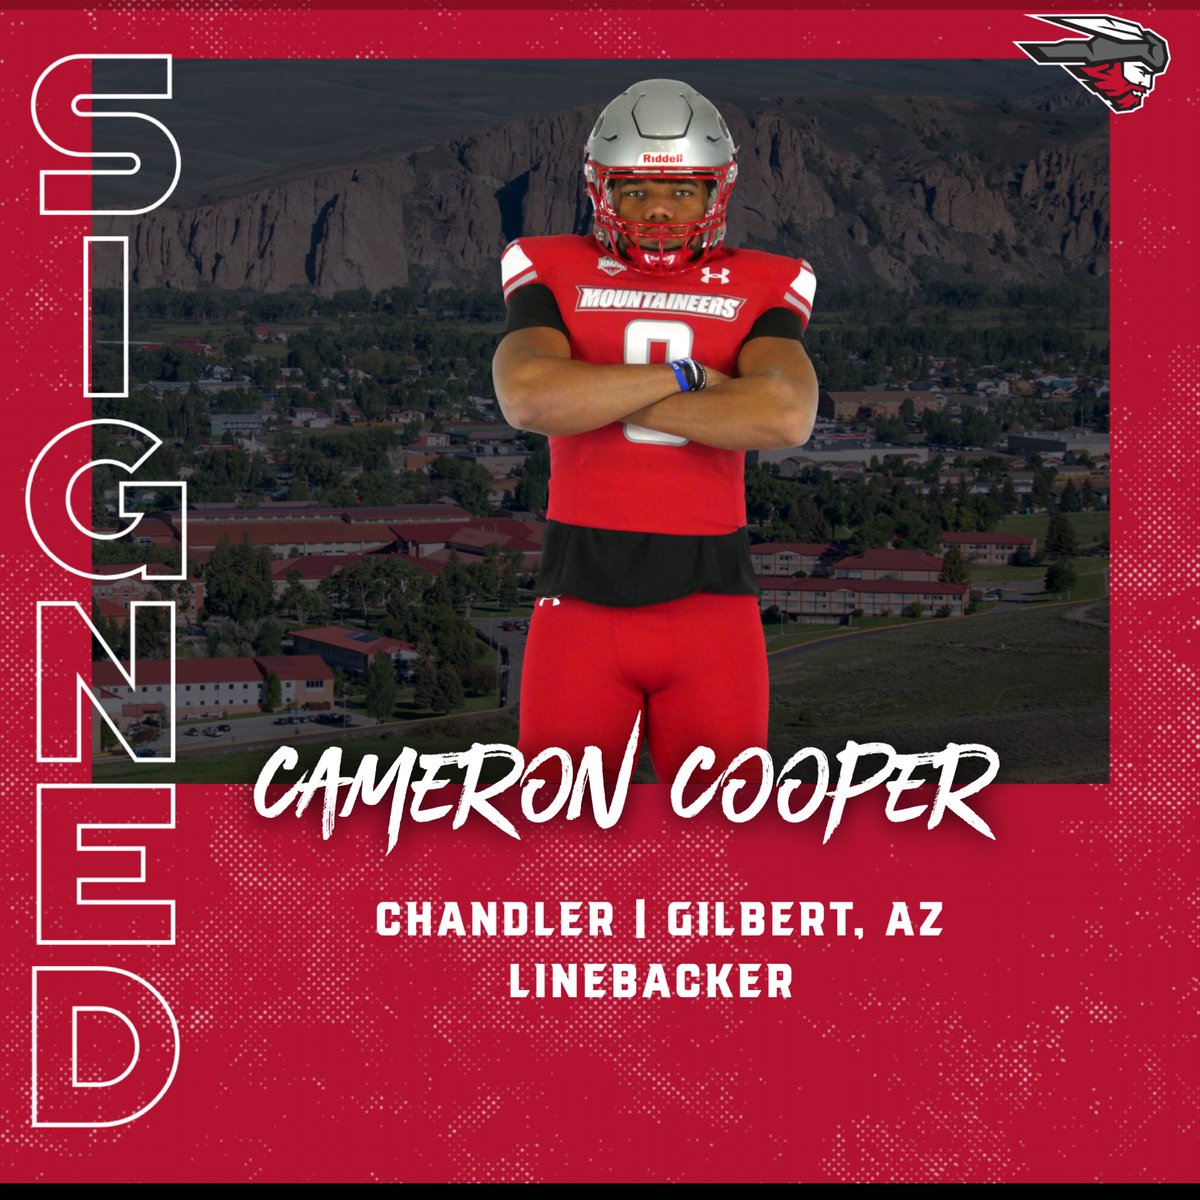 Welcome to Gunnison, America @camer0ncooper ! #ThinAirCrew #MountUp